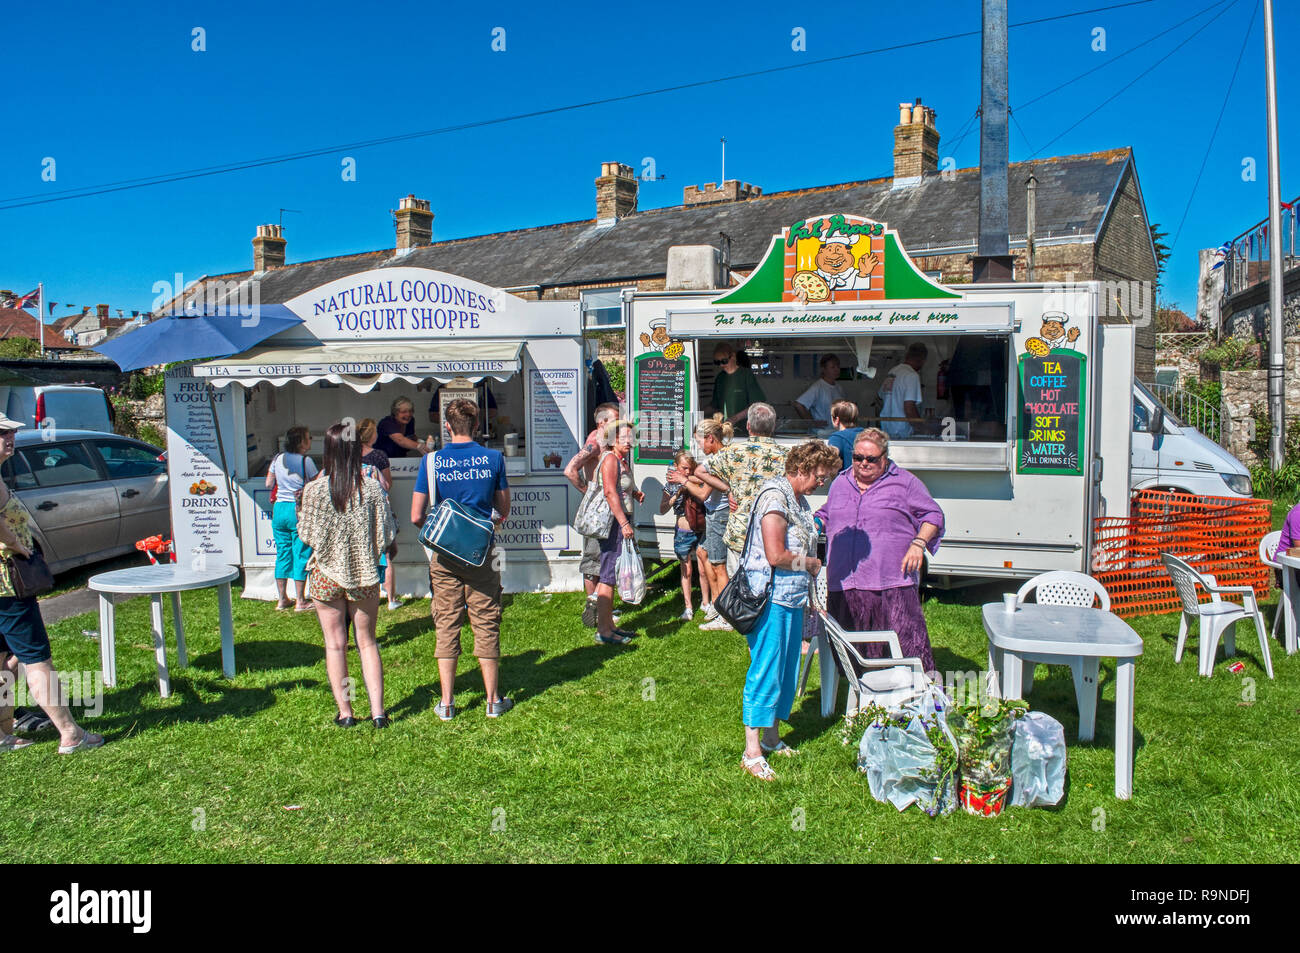 Food kiosks with people serving and customers outside at outdoor event, Isle of Wight, UK Stock Photo